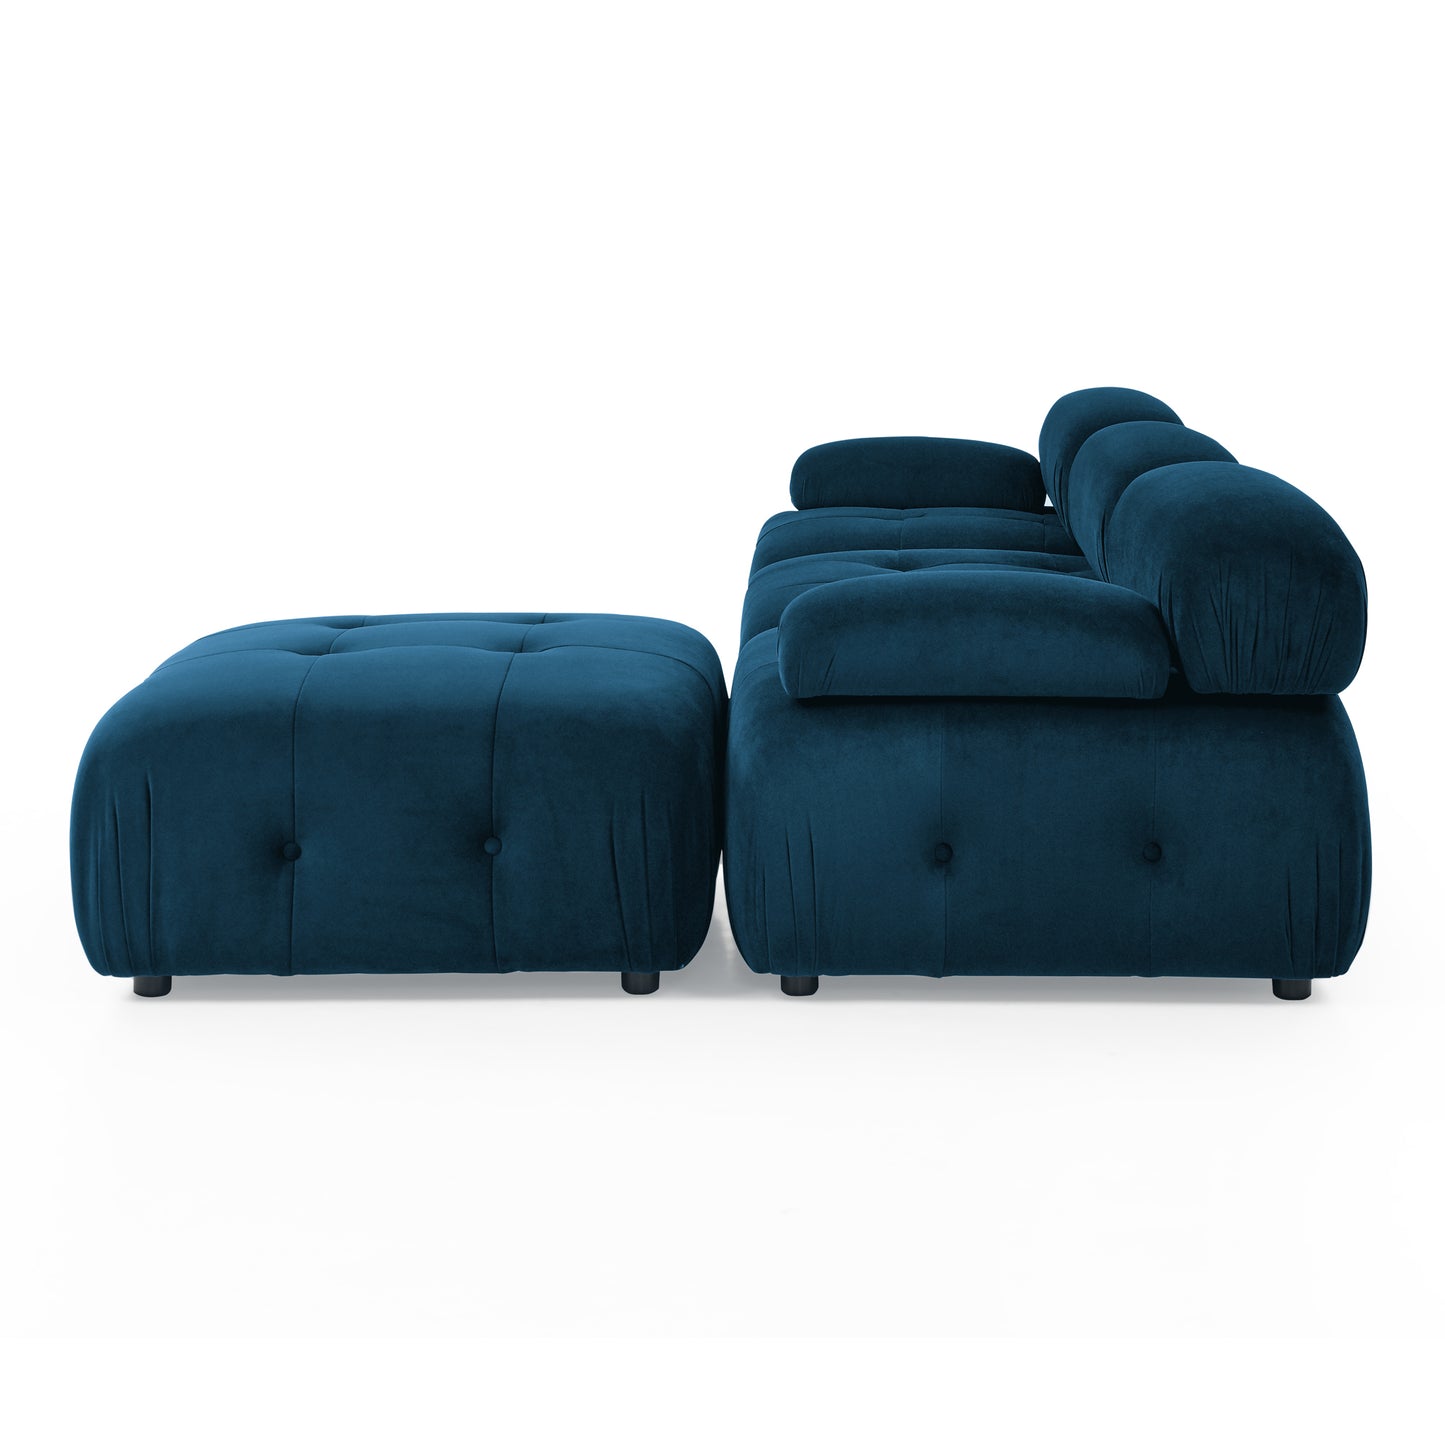 Modular Sectional Sofa, Button Tufted Designed and DIY Combination,L Shaped Couch with Reversible Ottoman, Navy Velvet